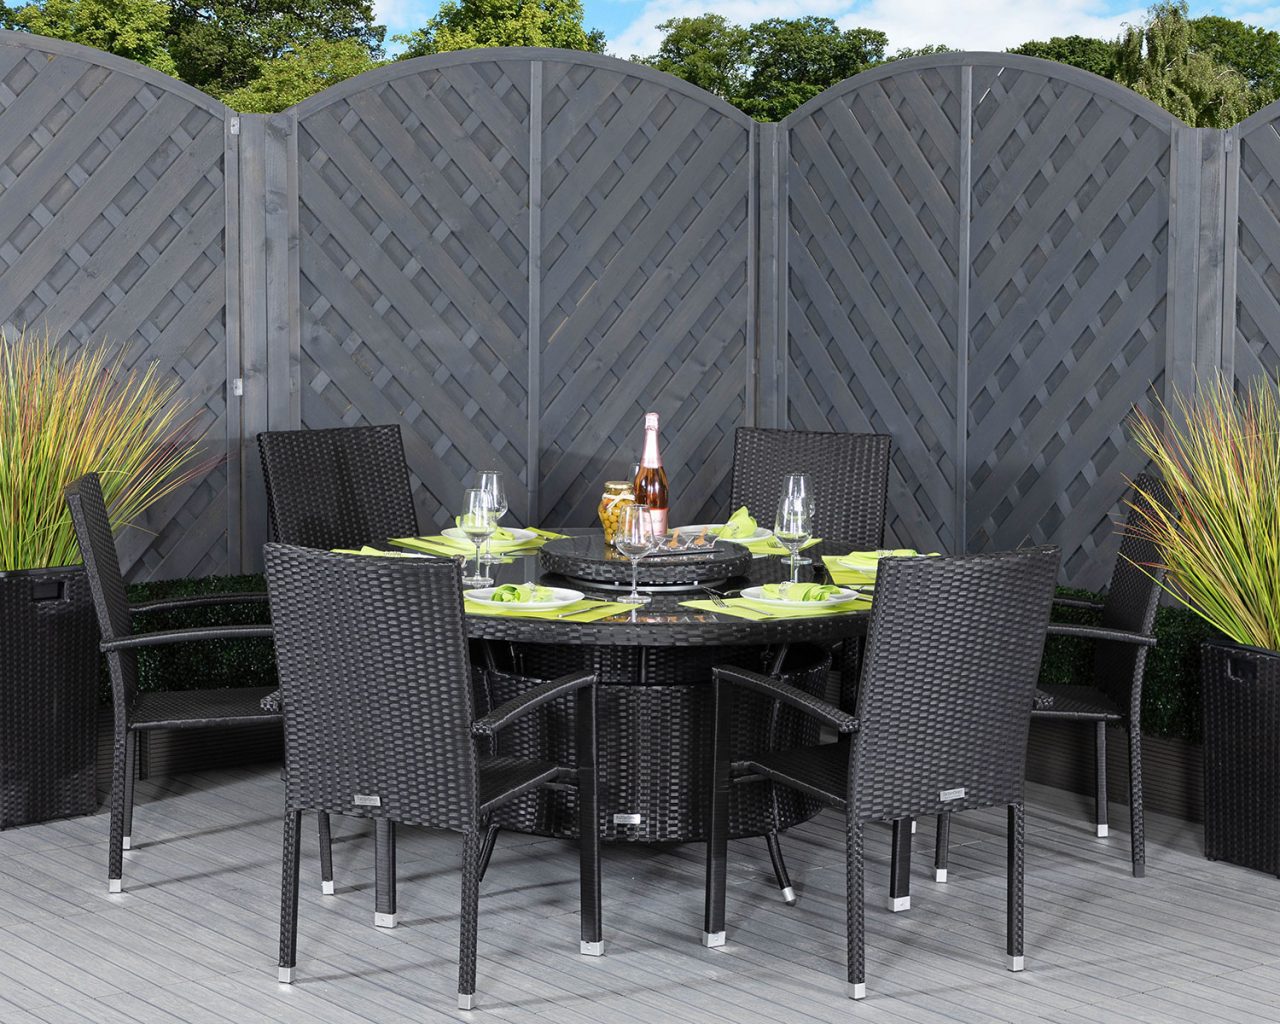 6 Seat Rattan Garden Dining Set With Large Round Table in Black - Rio